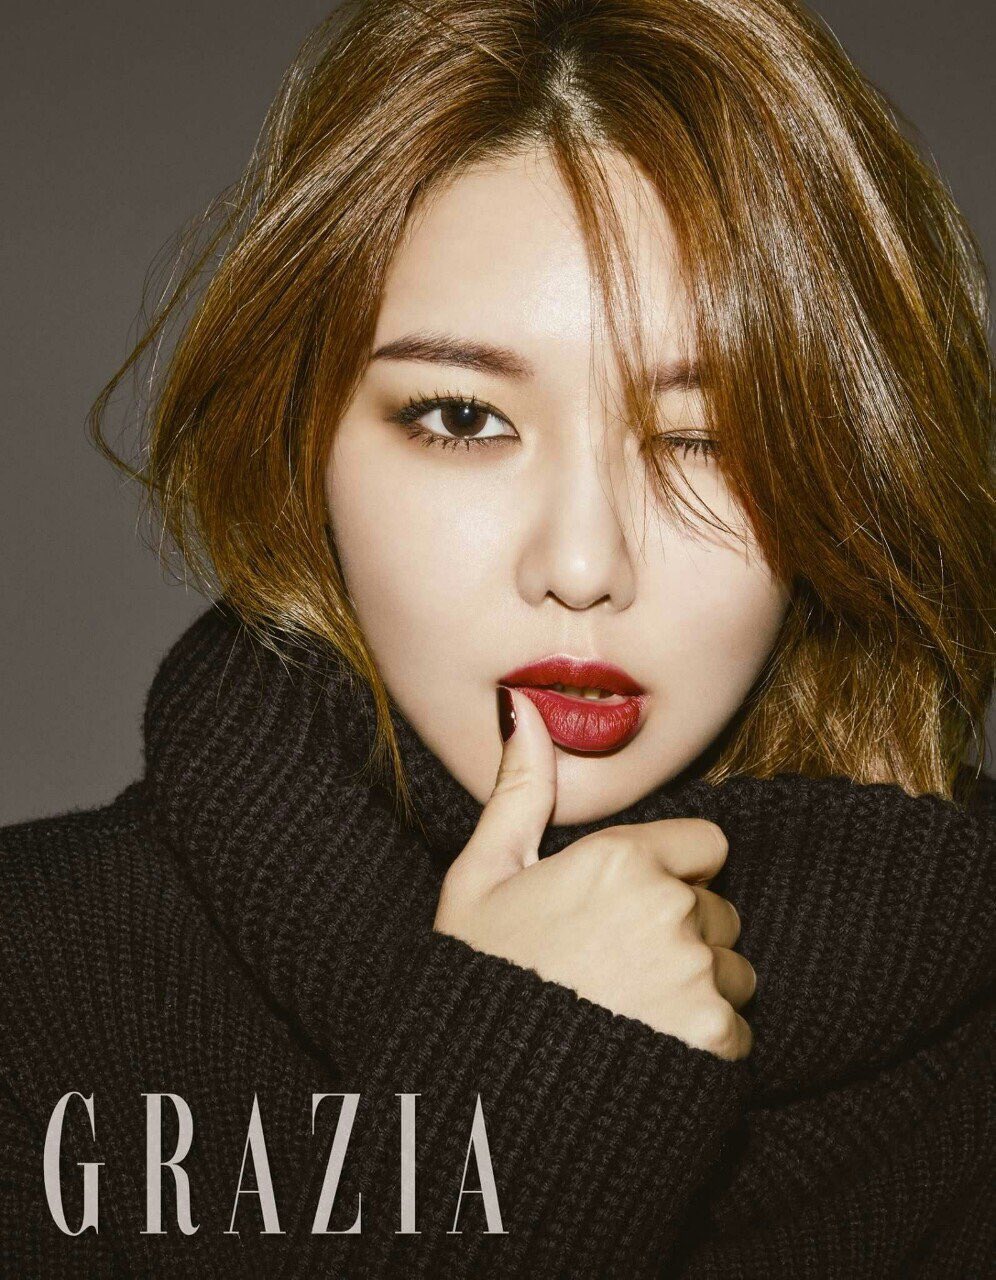 ANOTHER GIRL CRUSH BIRTHDAY!! HAPPY BIRTHDAY CHOI SOOYOUNG  